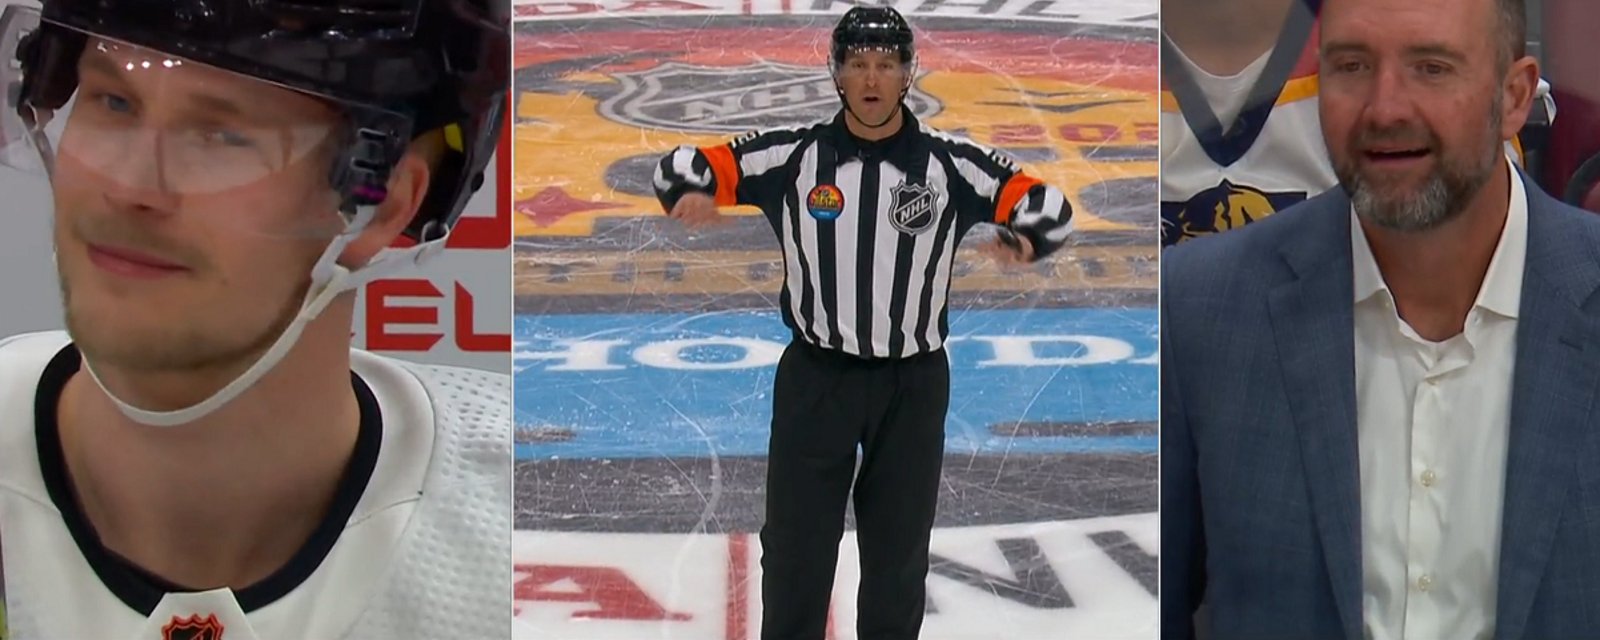 Fans furious over offside challenge at the All-Star Game.